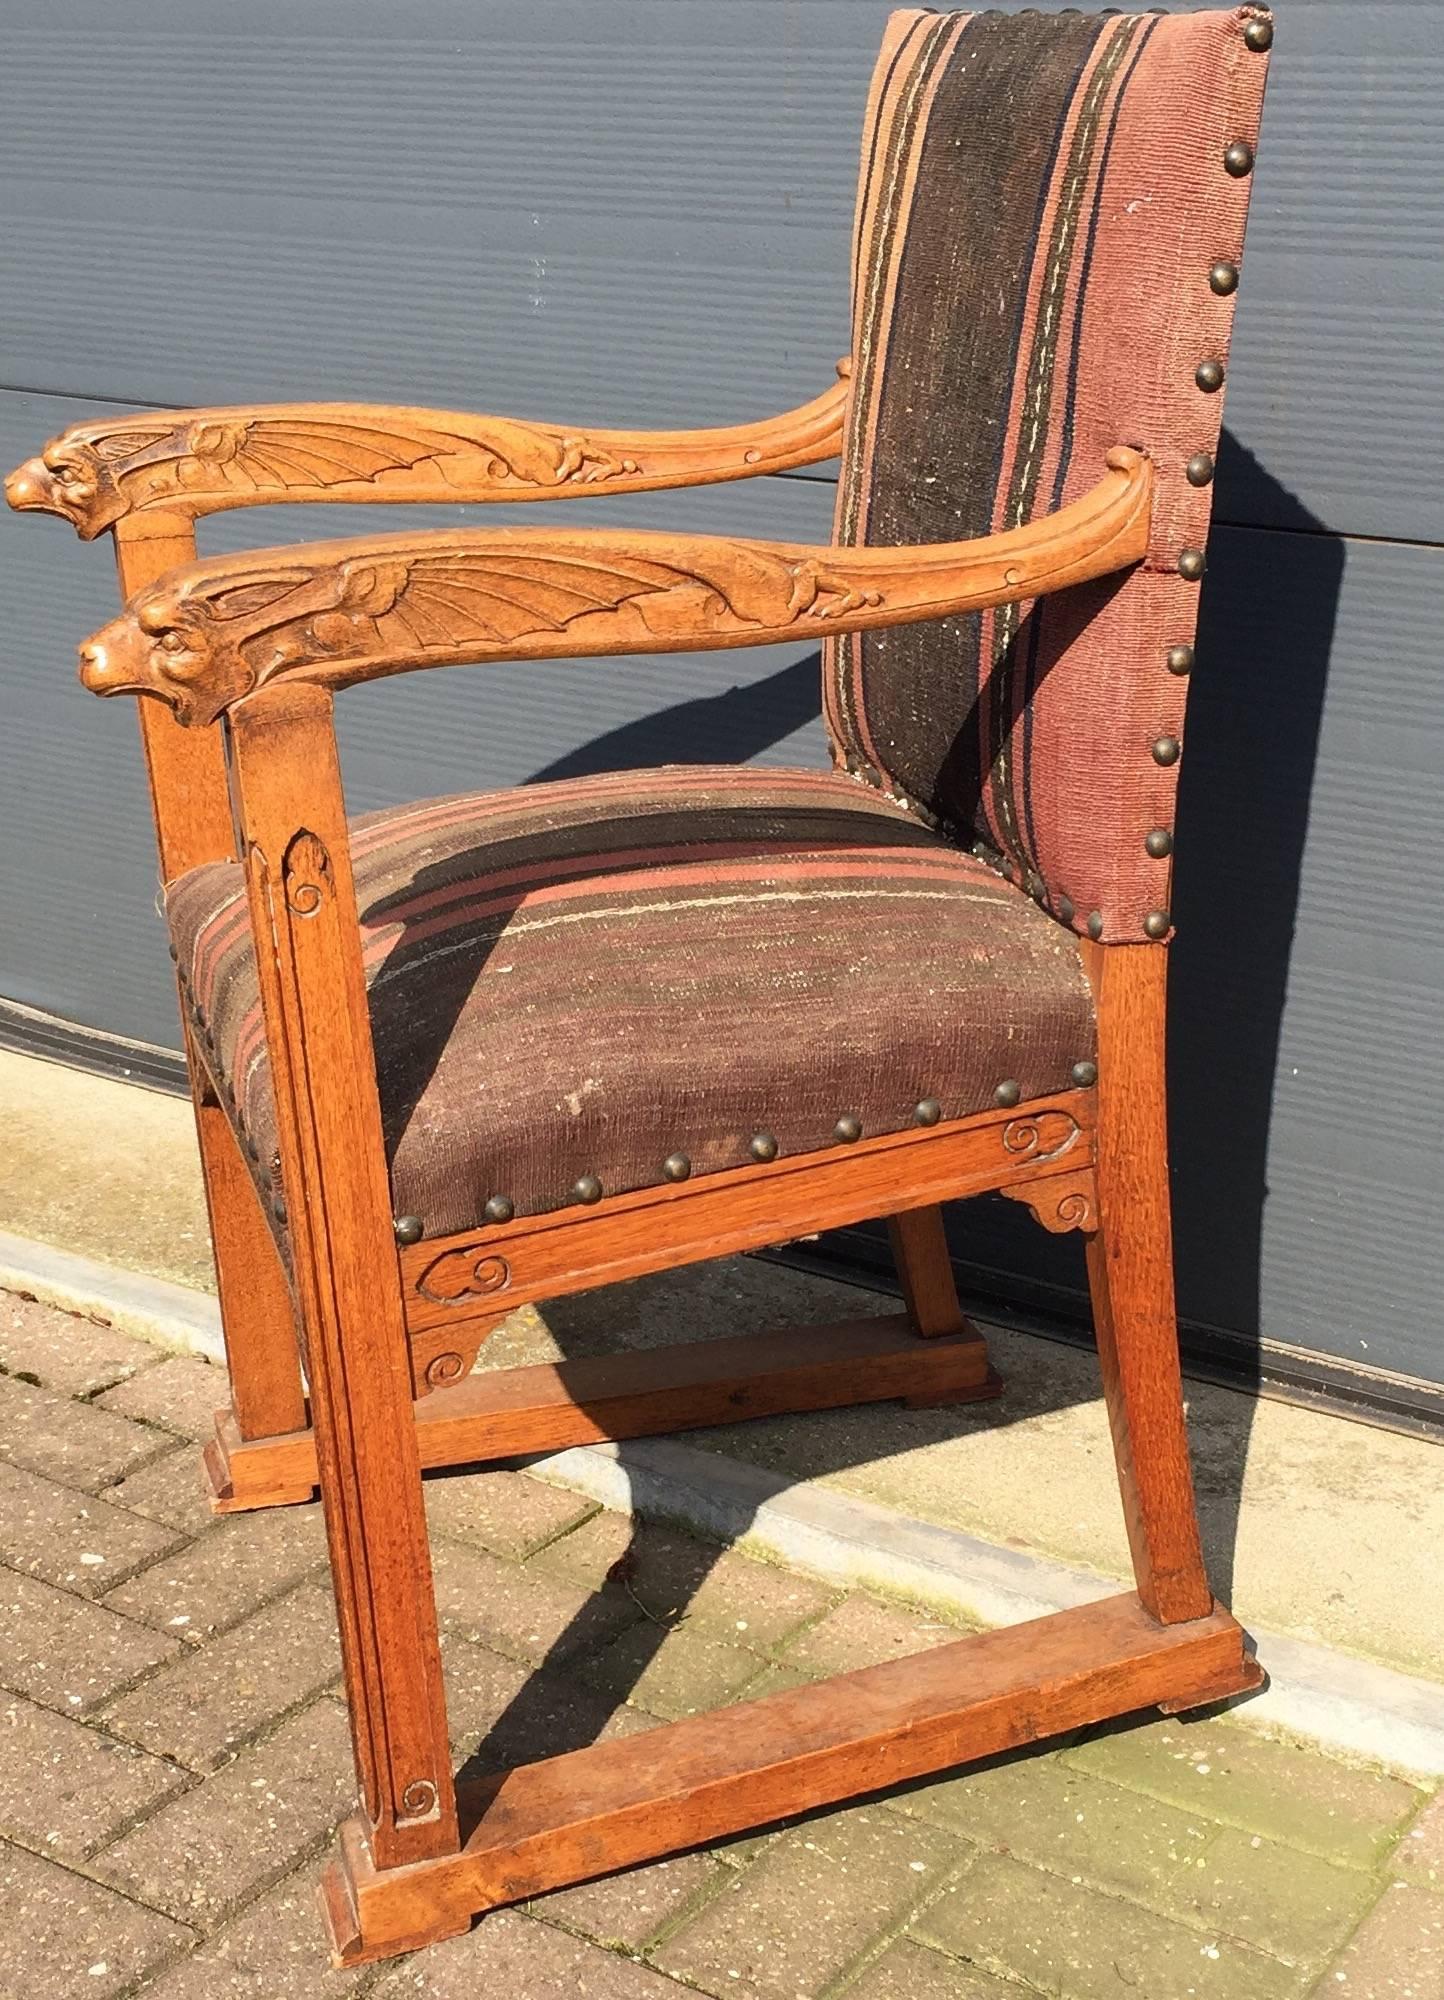 Unique and impressive Gothic chair from the late 1800s. 

This rare Gothic Revival church chair is as stabile as the day it was made and the woodwork is in good to excellent condition. The solid oak frame comes with various and good quality carved,